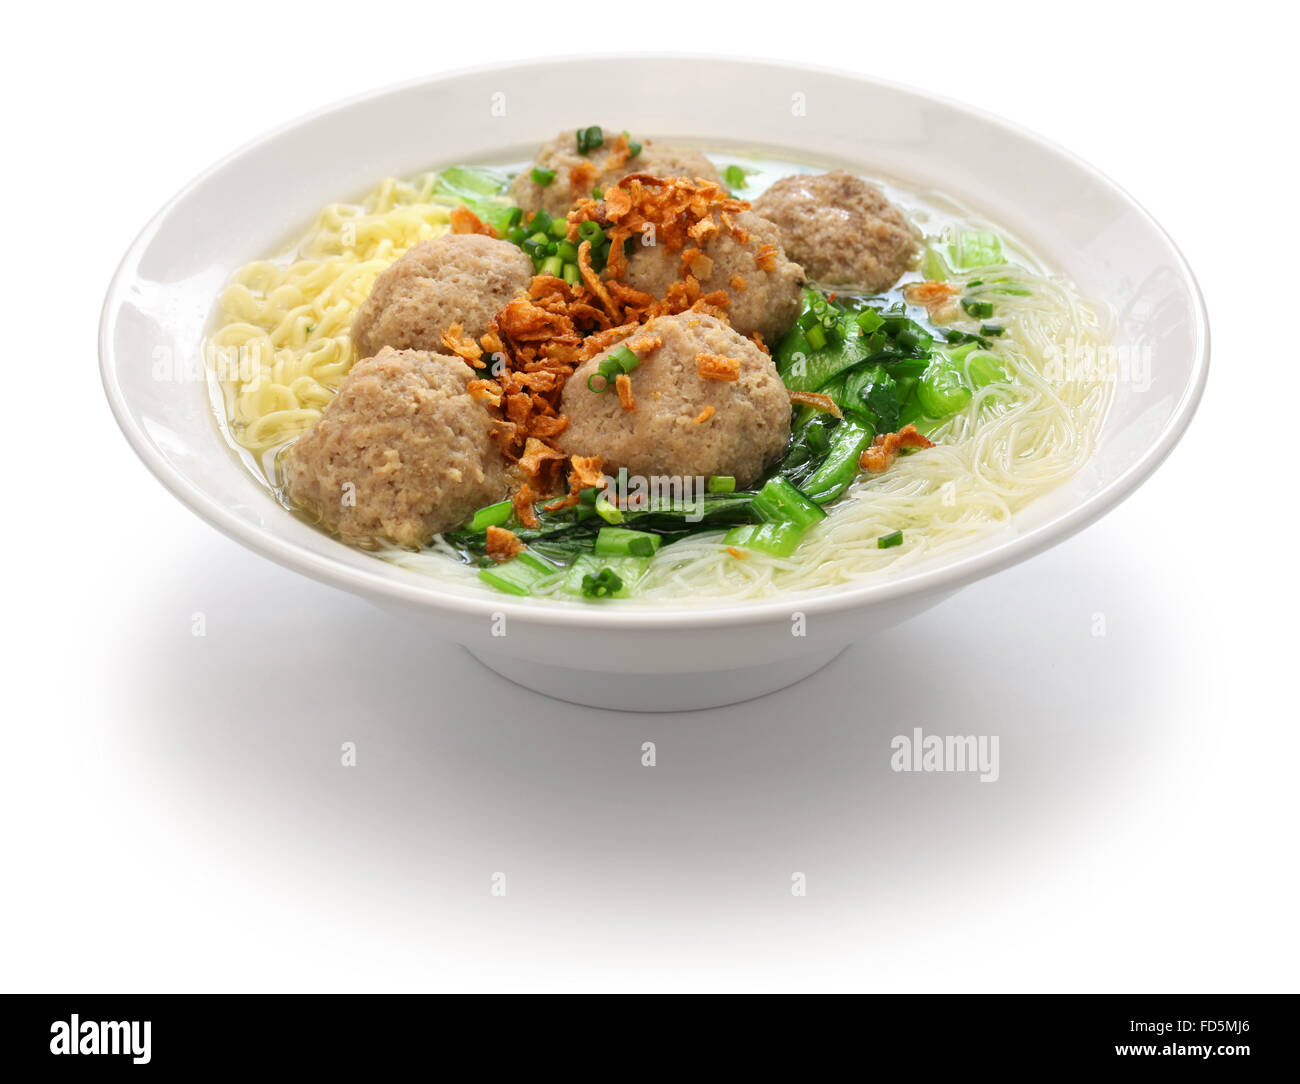 bakso, meatball soup with noodles, indonesian cuisine Stock Photo